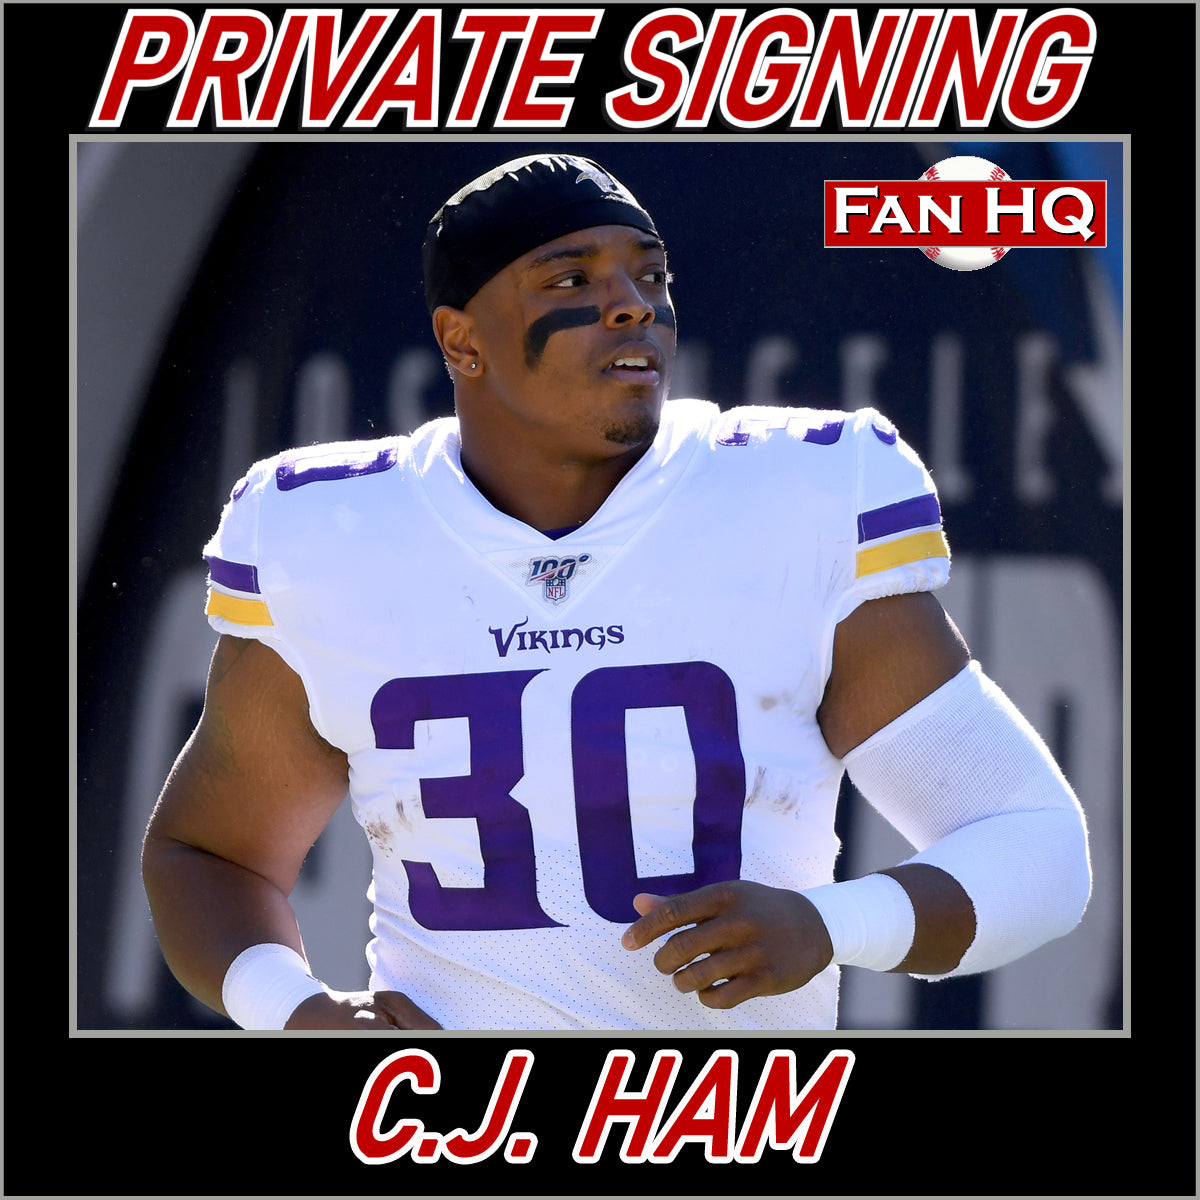 C.J. Ham Autographed Fan HQ Exclusive Blackout Nickname Jersey w/ Hammer Inscription (Numbered Edition) Standard Number (2-29)